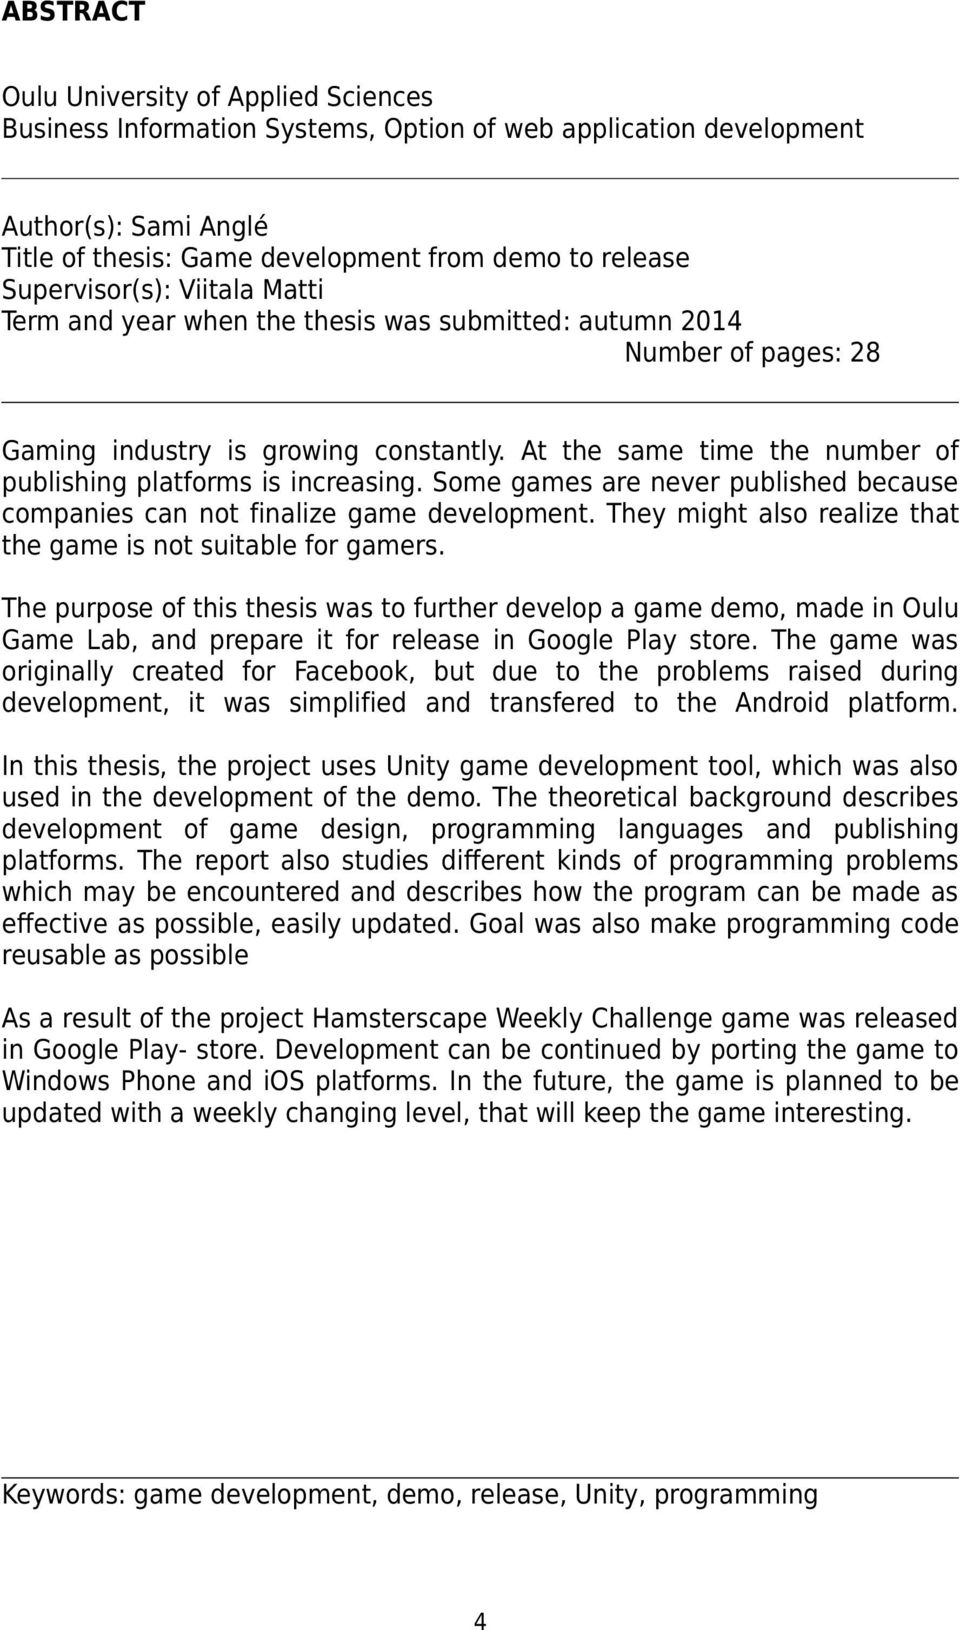 At the same time the number of publishing platforms is increasing. Some games are never published because companies can not finalize game development.